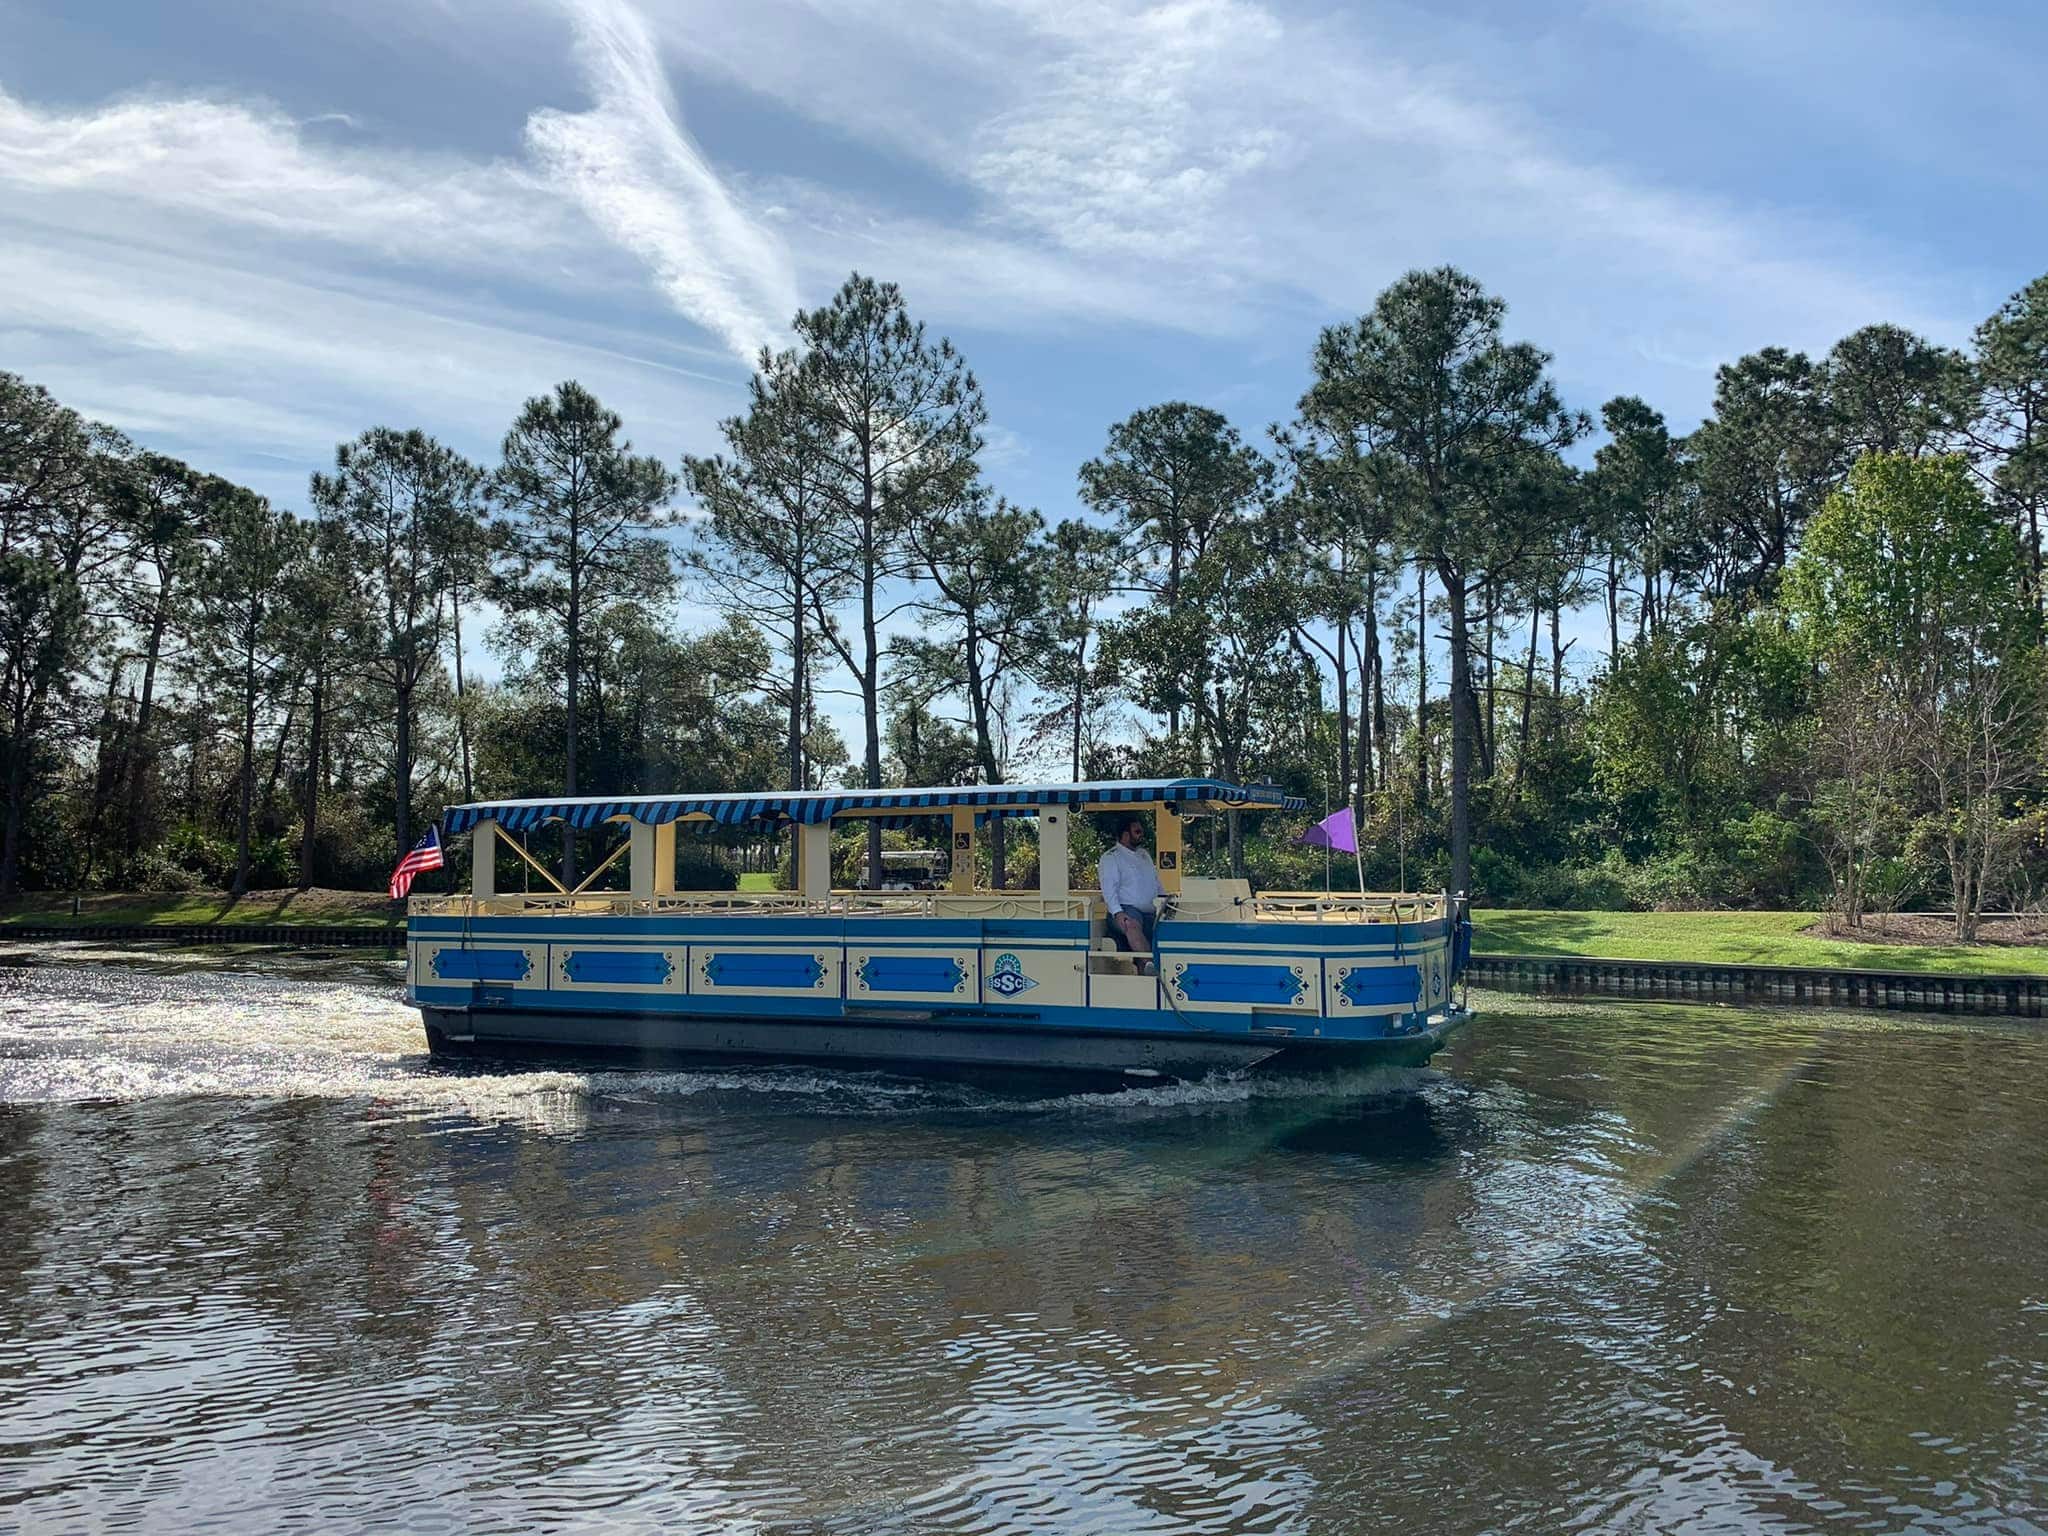 Why you should take the Disney Water Taxi